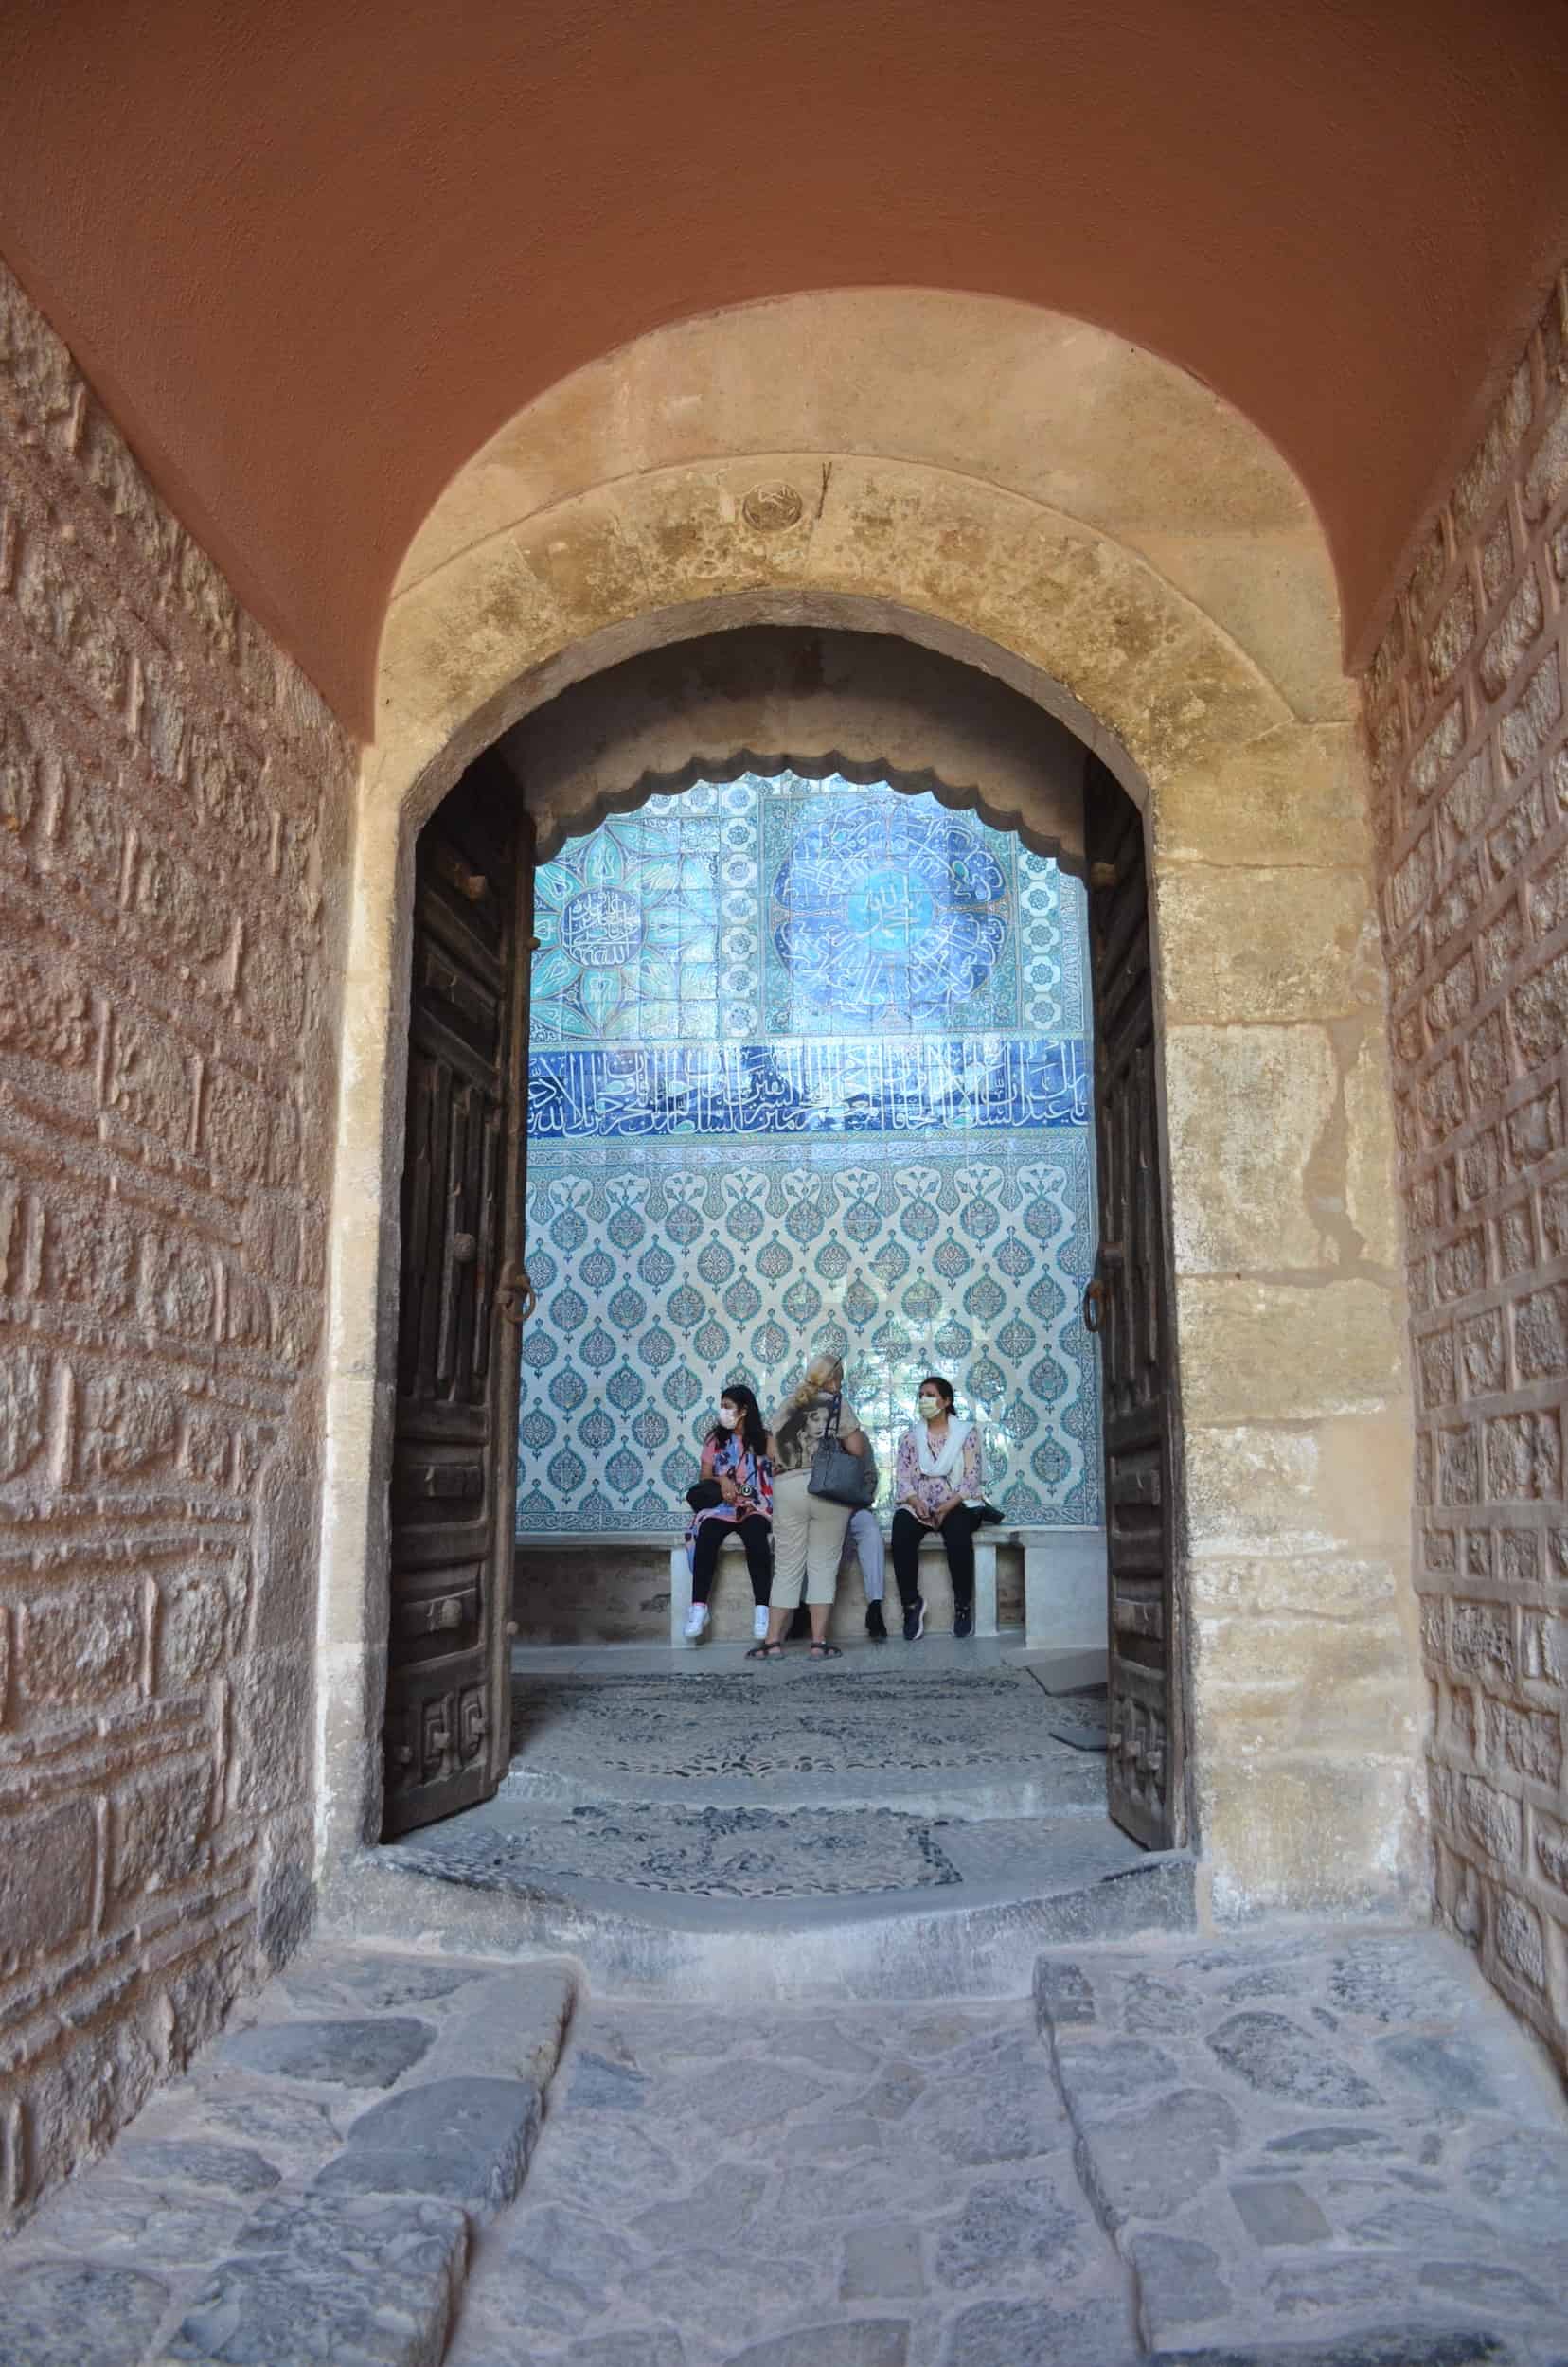 Outside of the Curtain Gate in the Imperial Harem at Topkapı Palace in Istanbul, Turkey